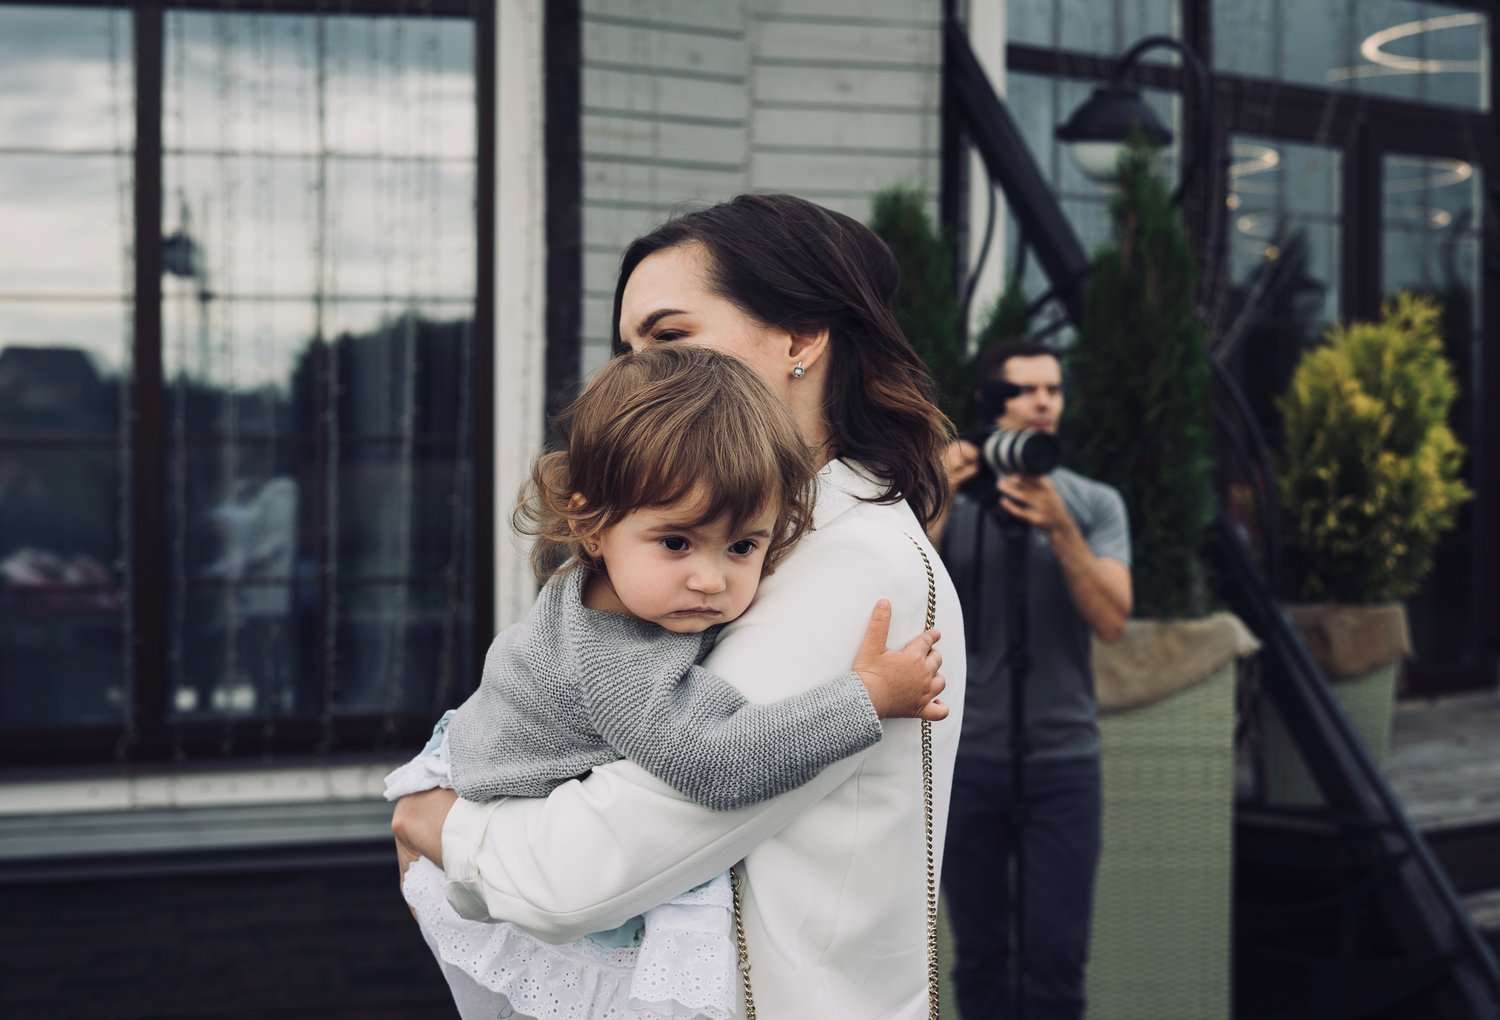 instead of making the toddler aggression worse, opt for hugging your child to calm them down.